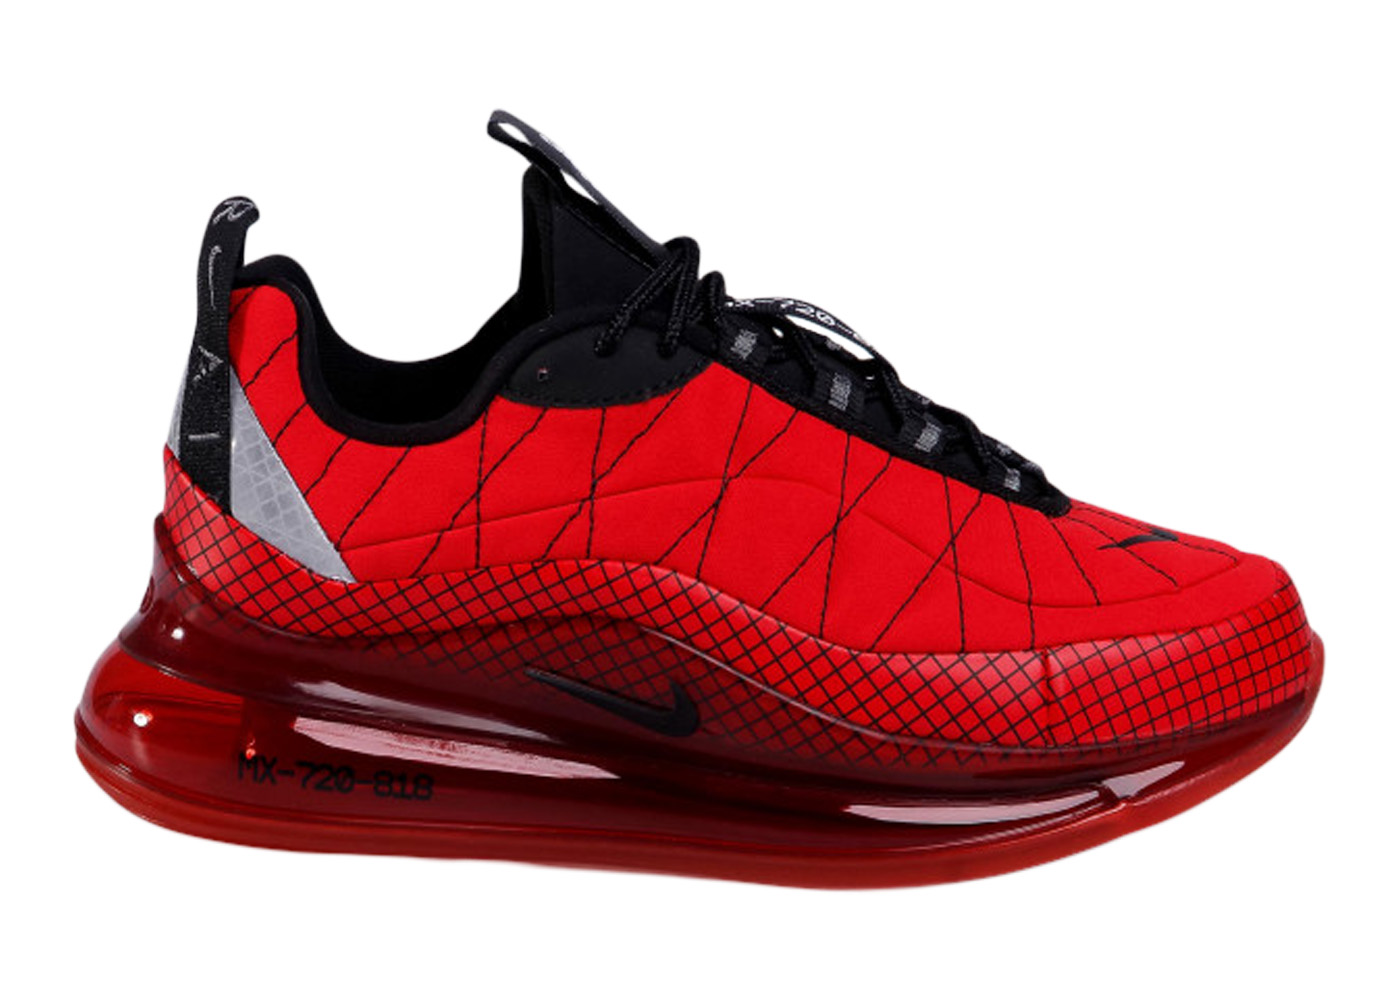 Nike MX 720 818 Speed Red Black Univerity Red (GS) Kids' - CD4392 